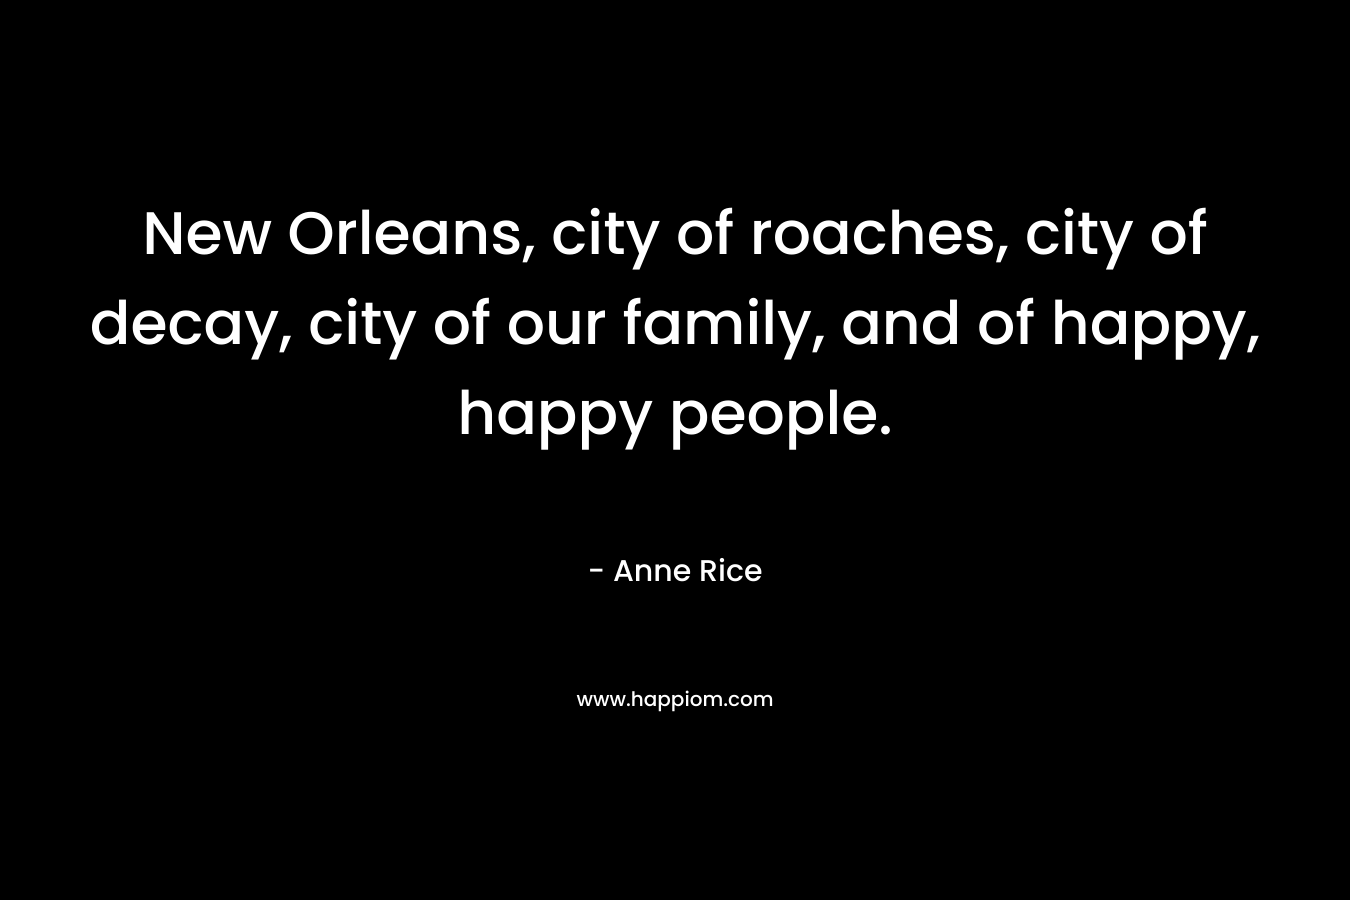 New Orleans, city of roaches, city of decay, city of our family, and of happy, happy people. – Anne Rice